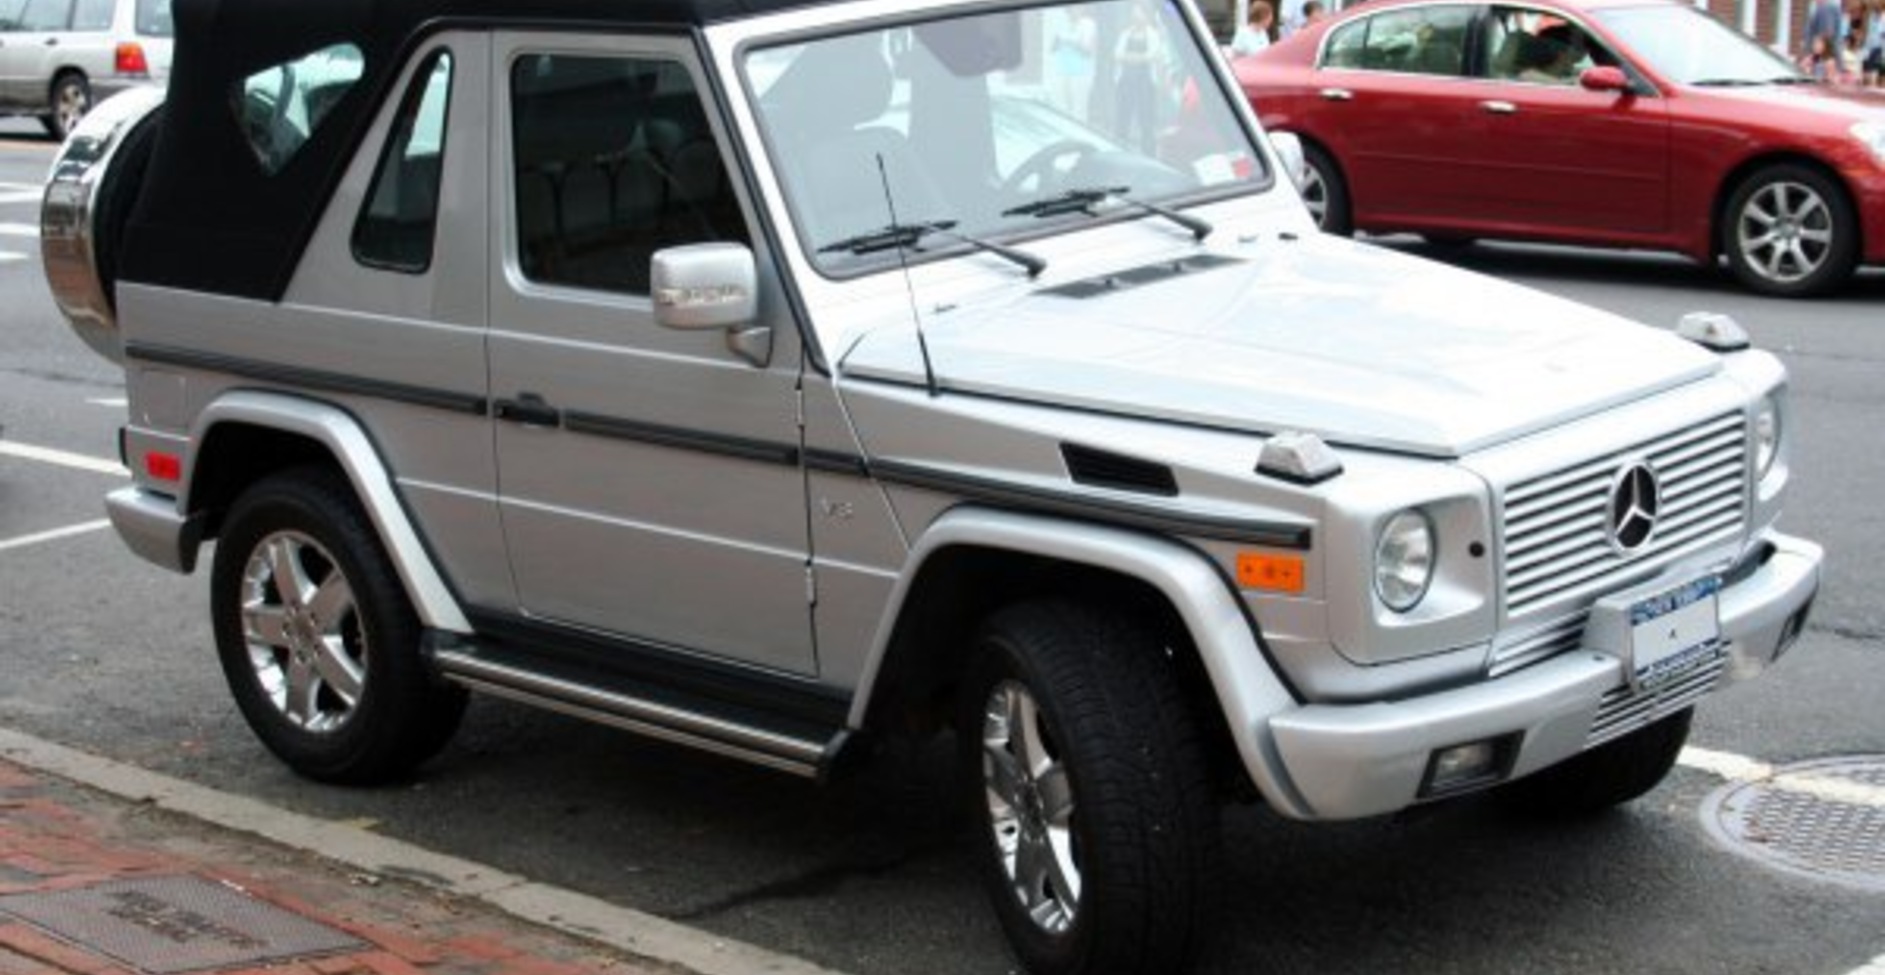 Mercedes-Benz G-class Cabriolet (W463, facelift 2000) G 320 V6 (215 Hp) 4MATIC Automatic 2001, 2002, 2003, 2004, 2005, 2006 